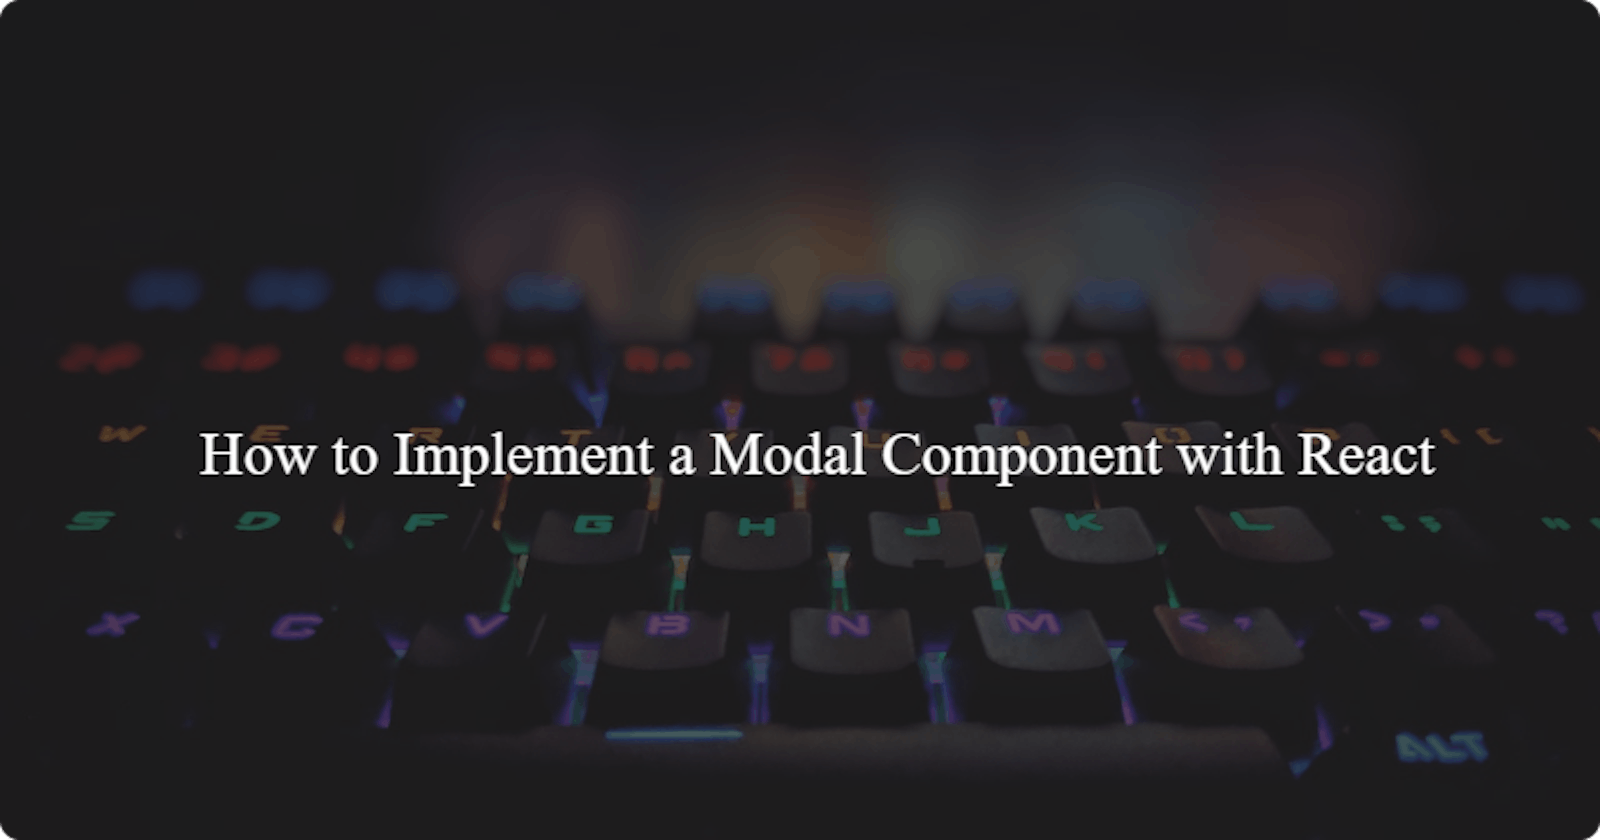 How to Implement a Modal Component with React